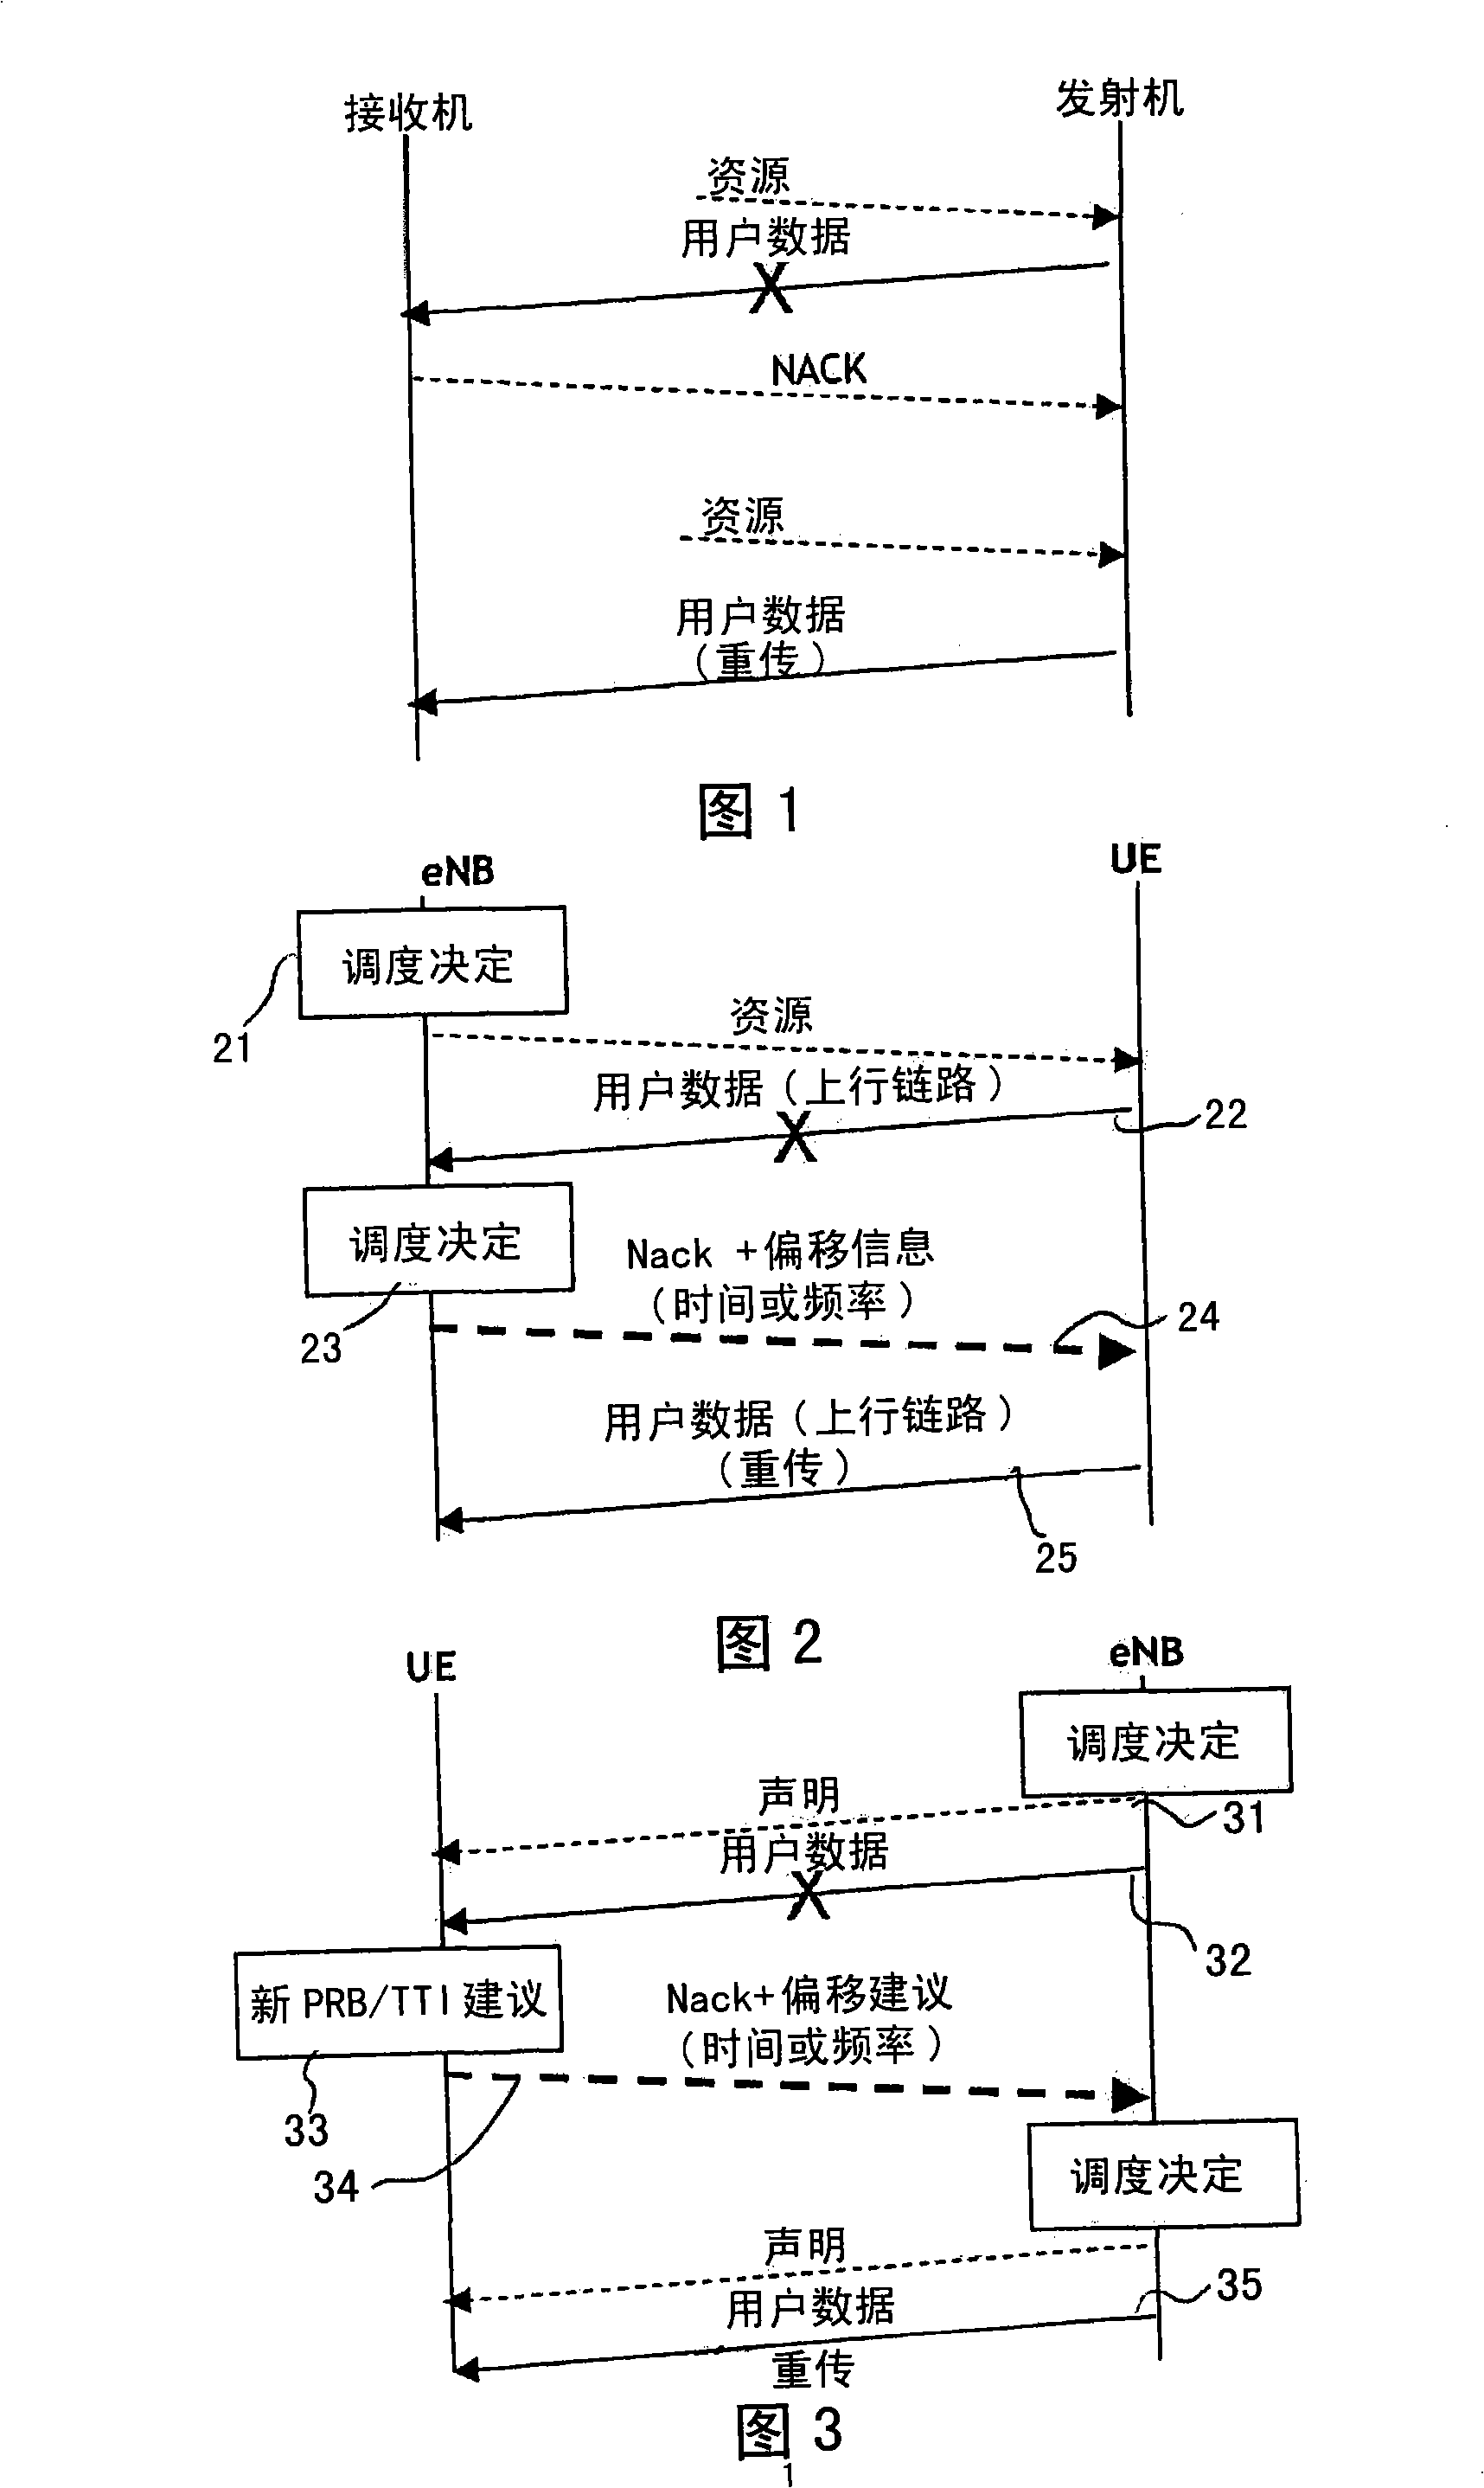 Method for allocating resources in a mobile radio communication network, and the corresponding transmitter and receiver